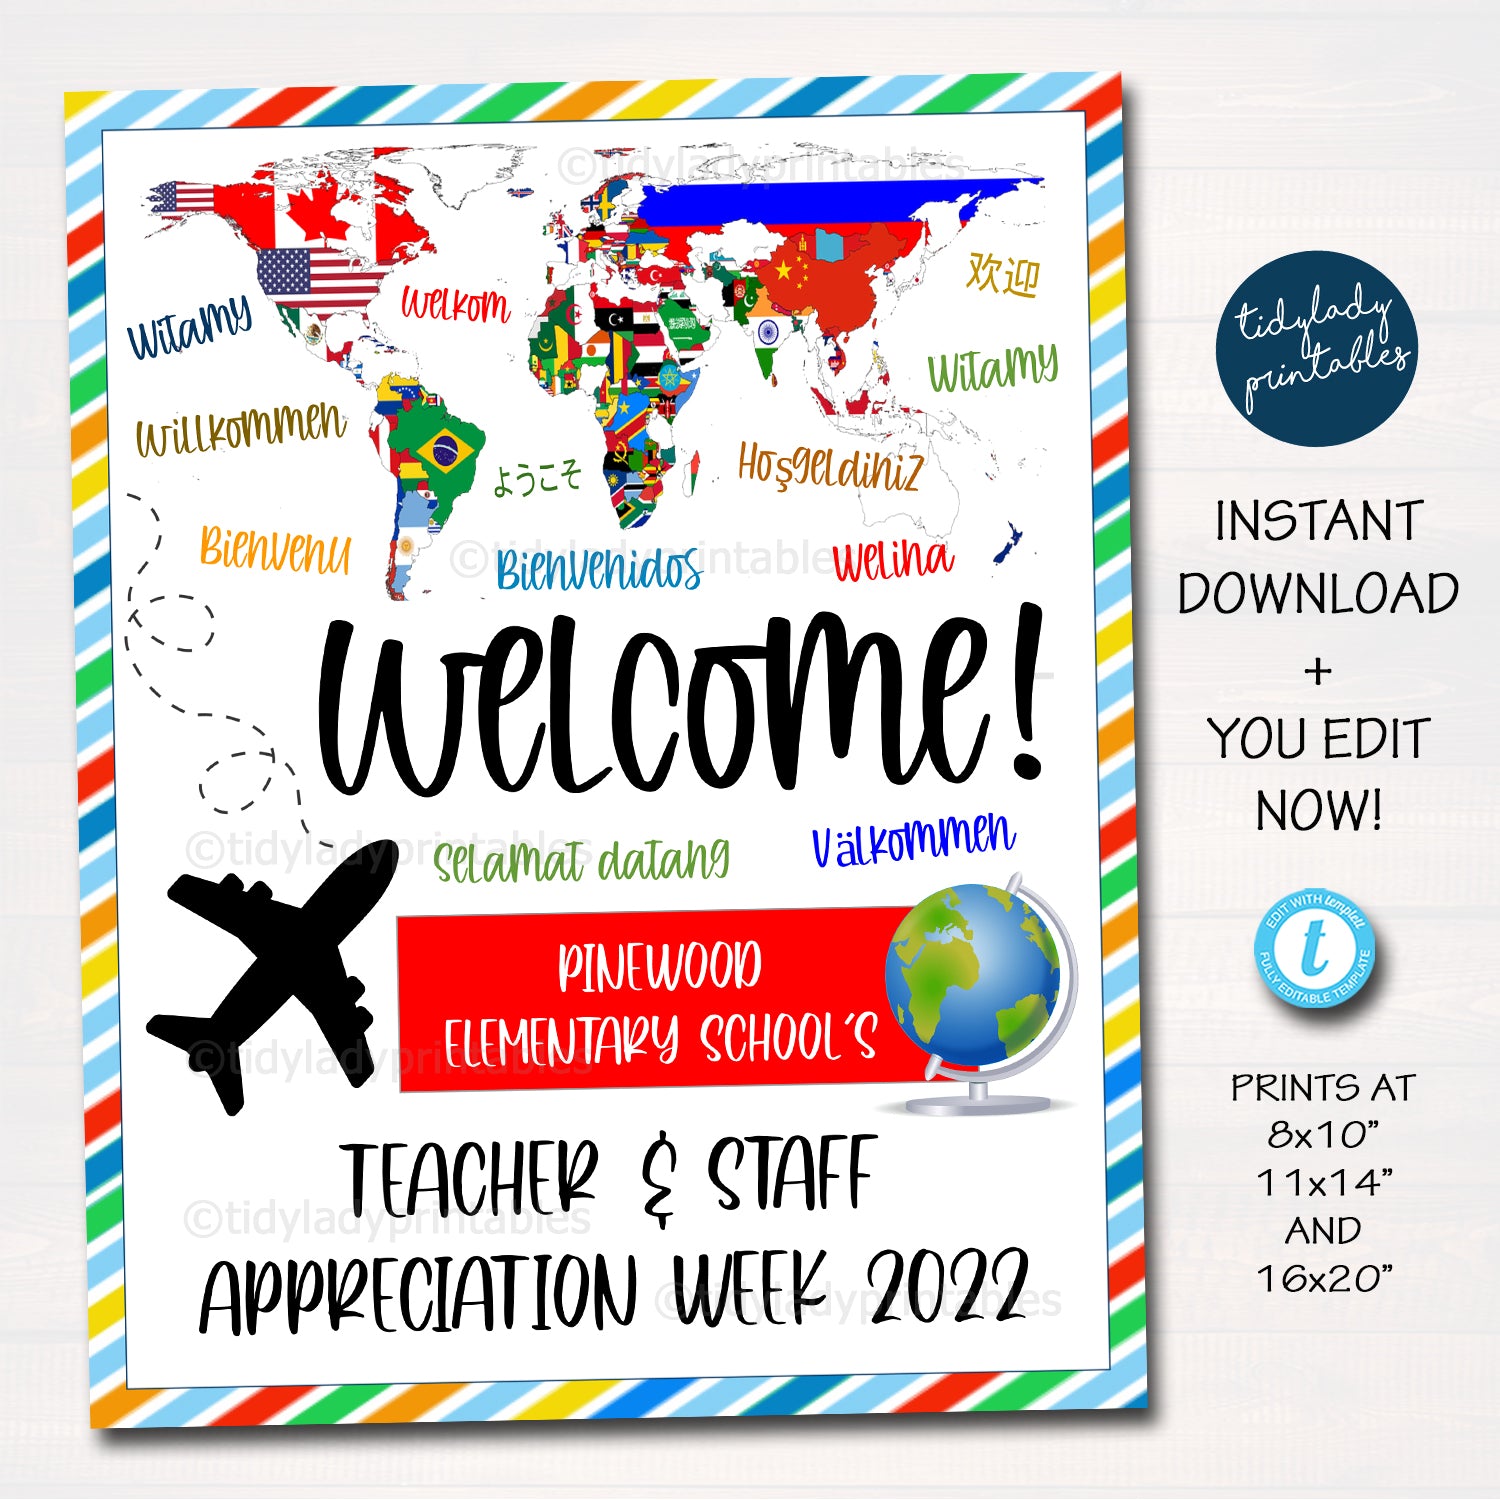 Spanish Class Editable Welcome Sign Instant Download Teacher